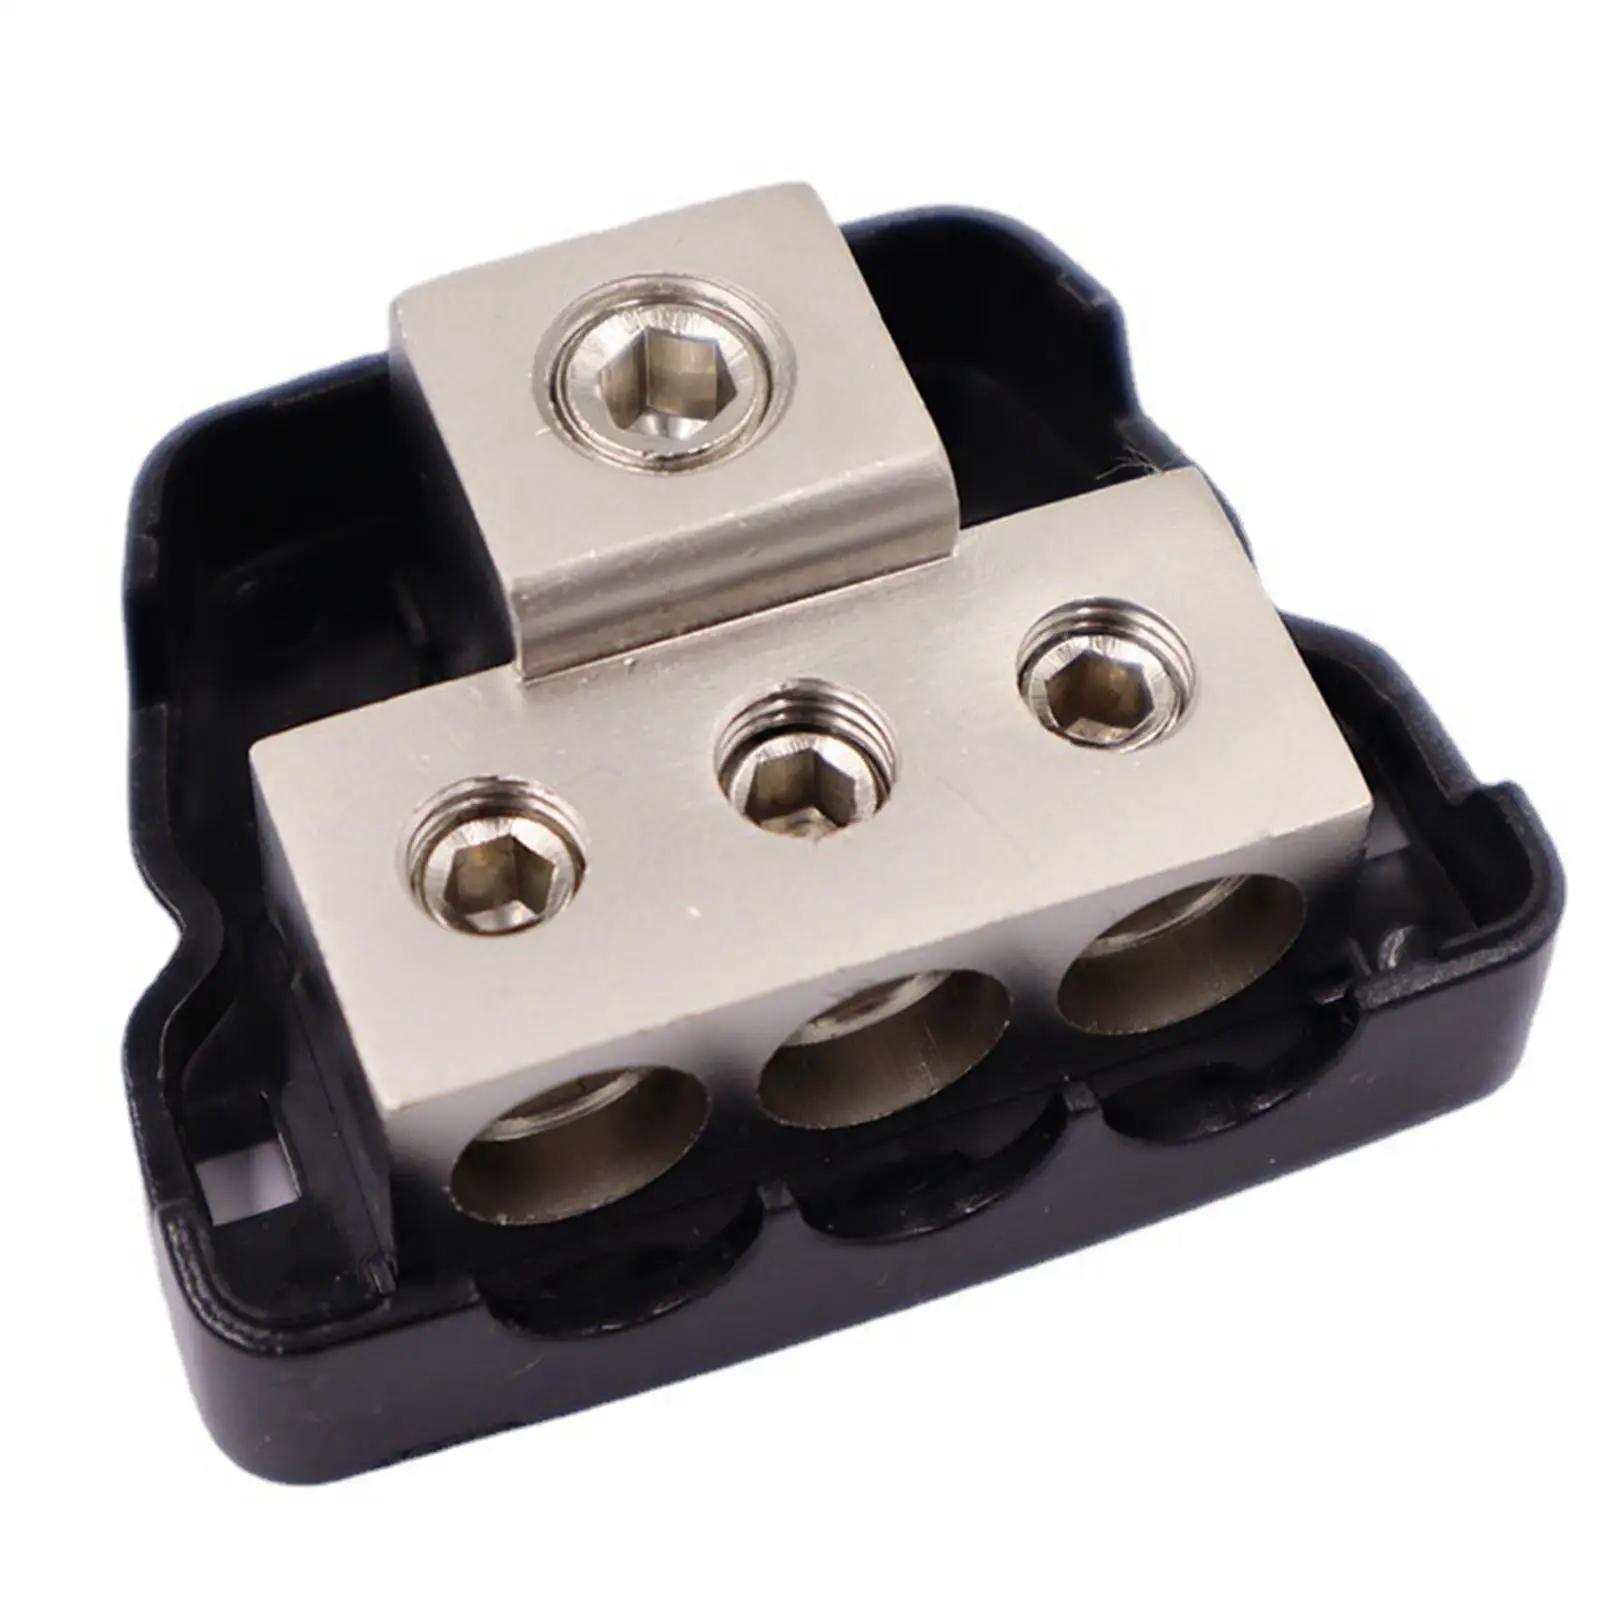 Power Distribution Block, 3 Way 1 in 3 Out Distribution Blocks,